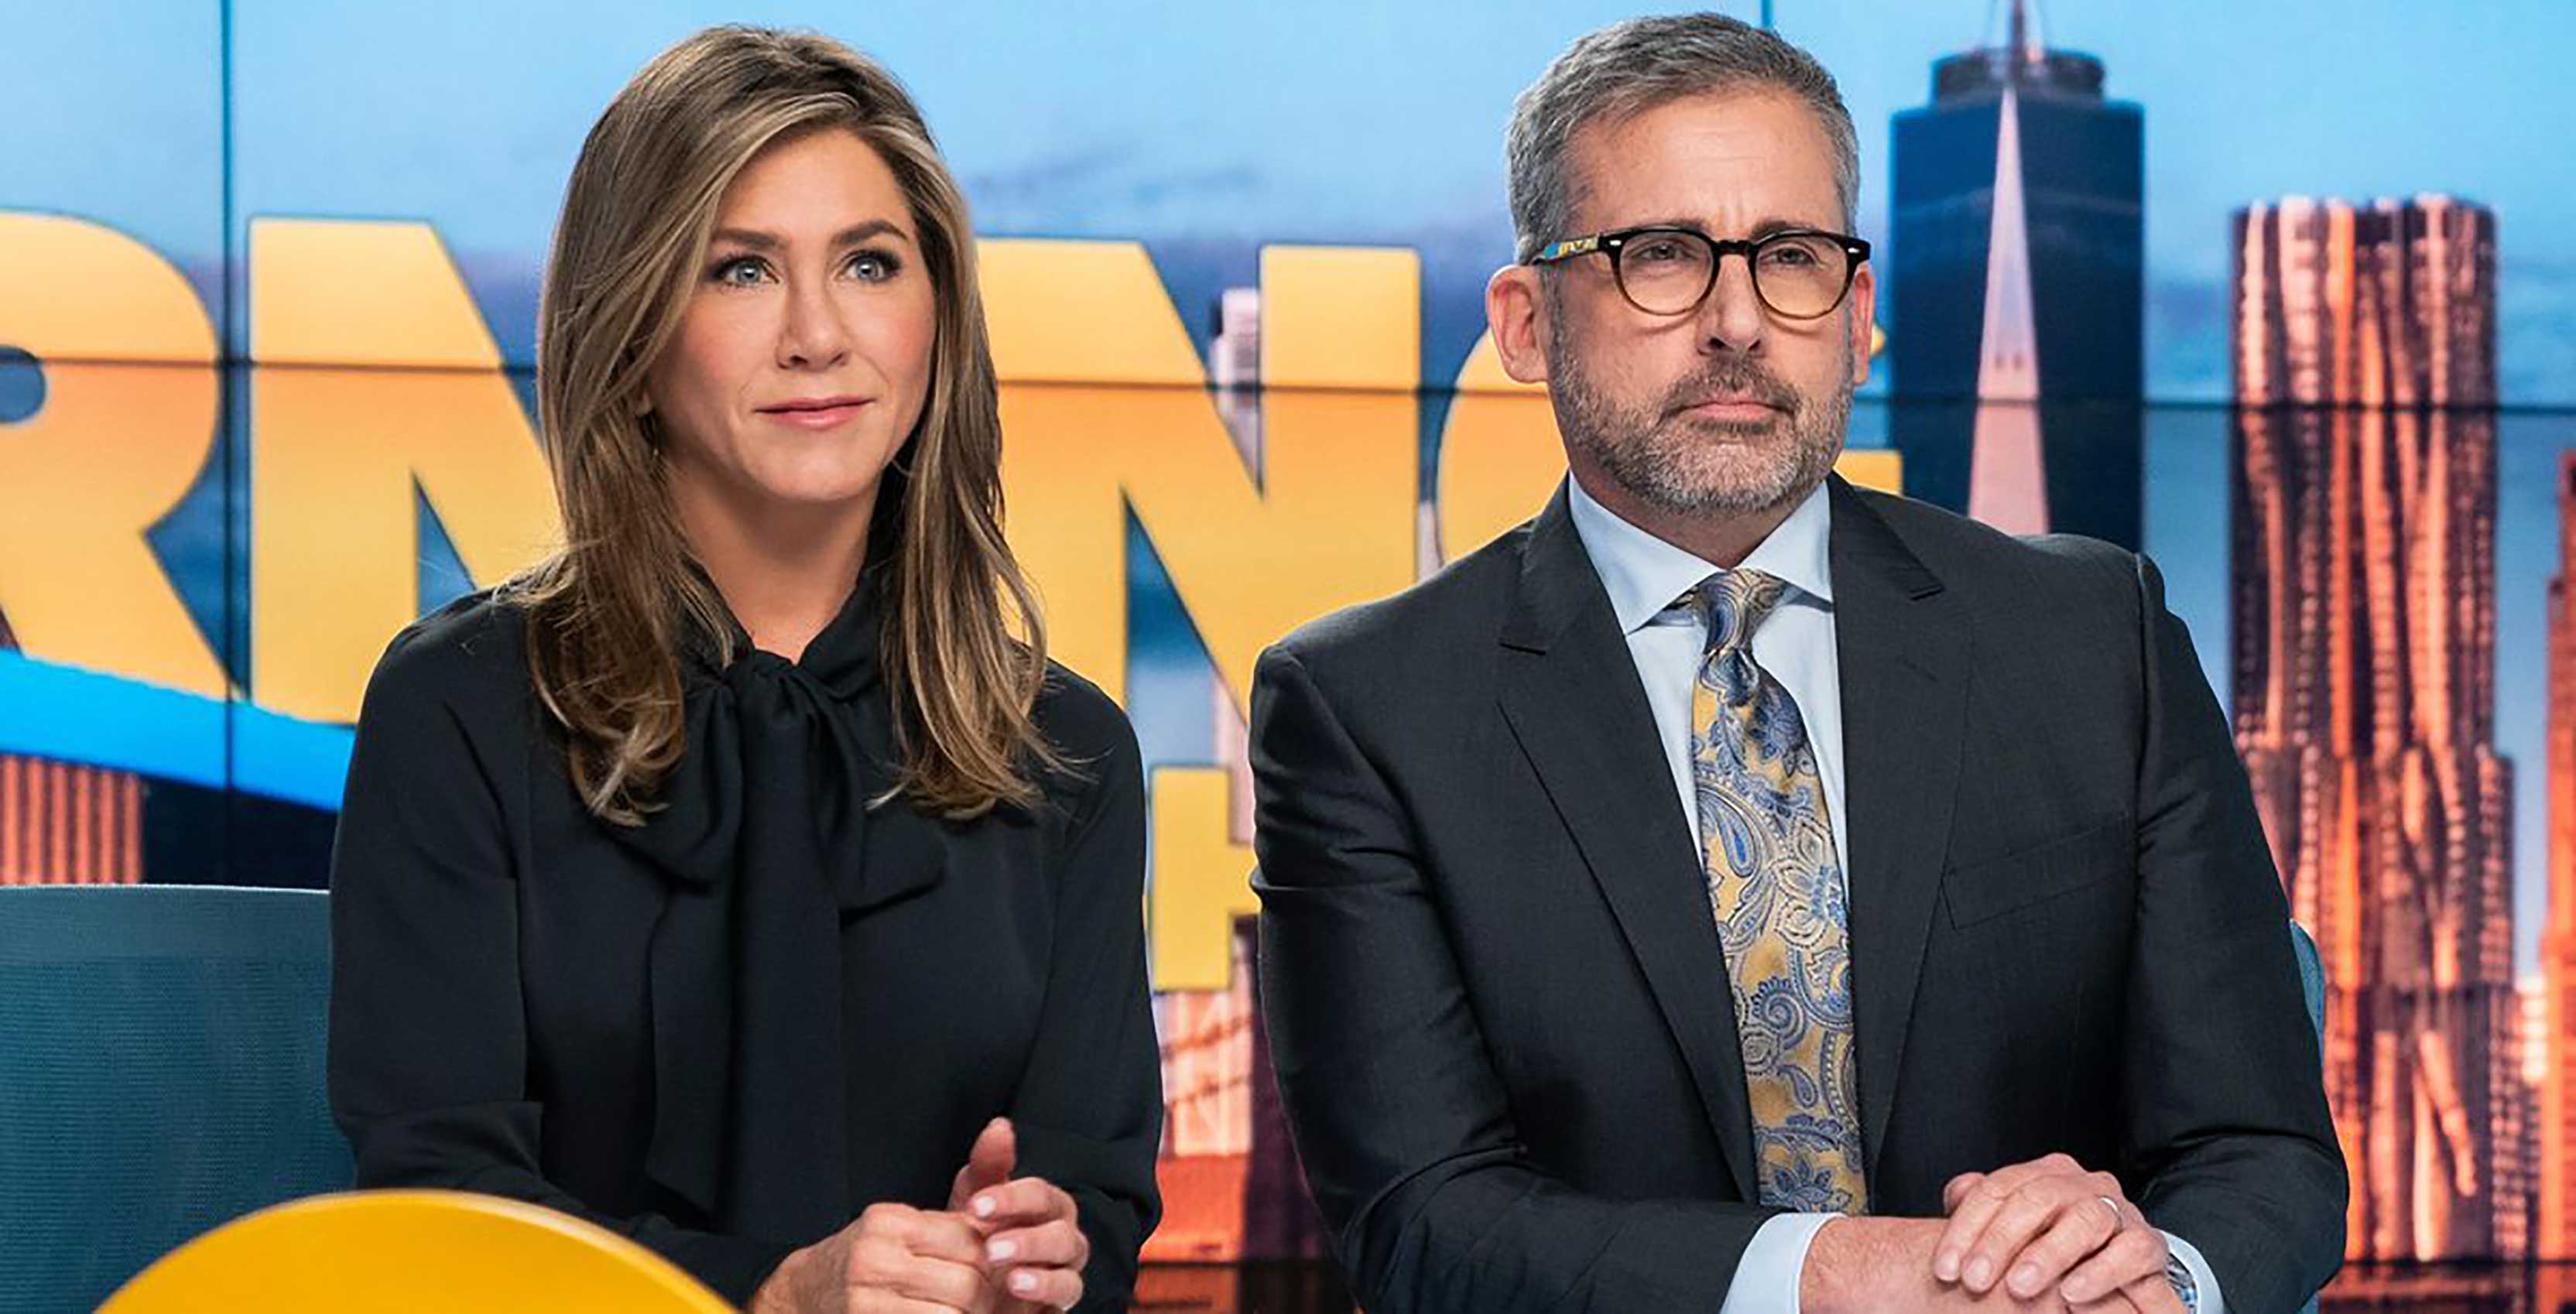 The Morning Show Jennifer Aniston and Steve Carrell